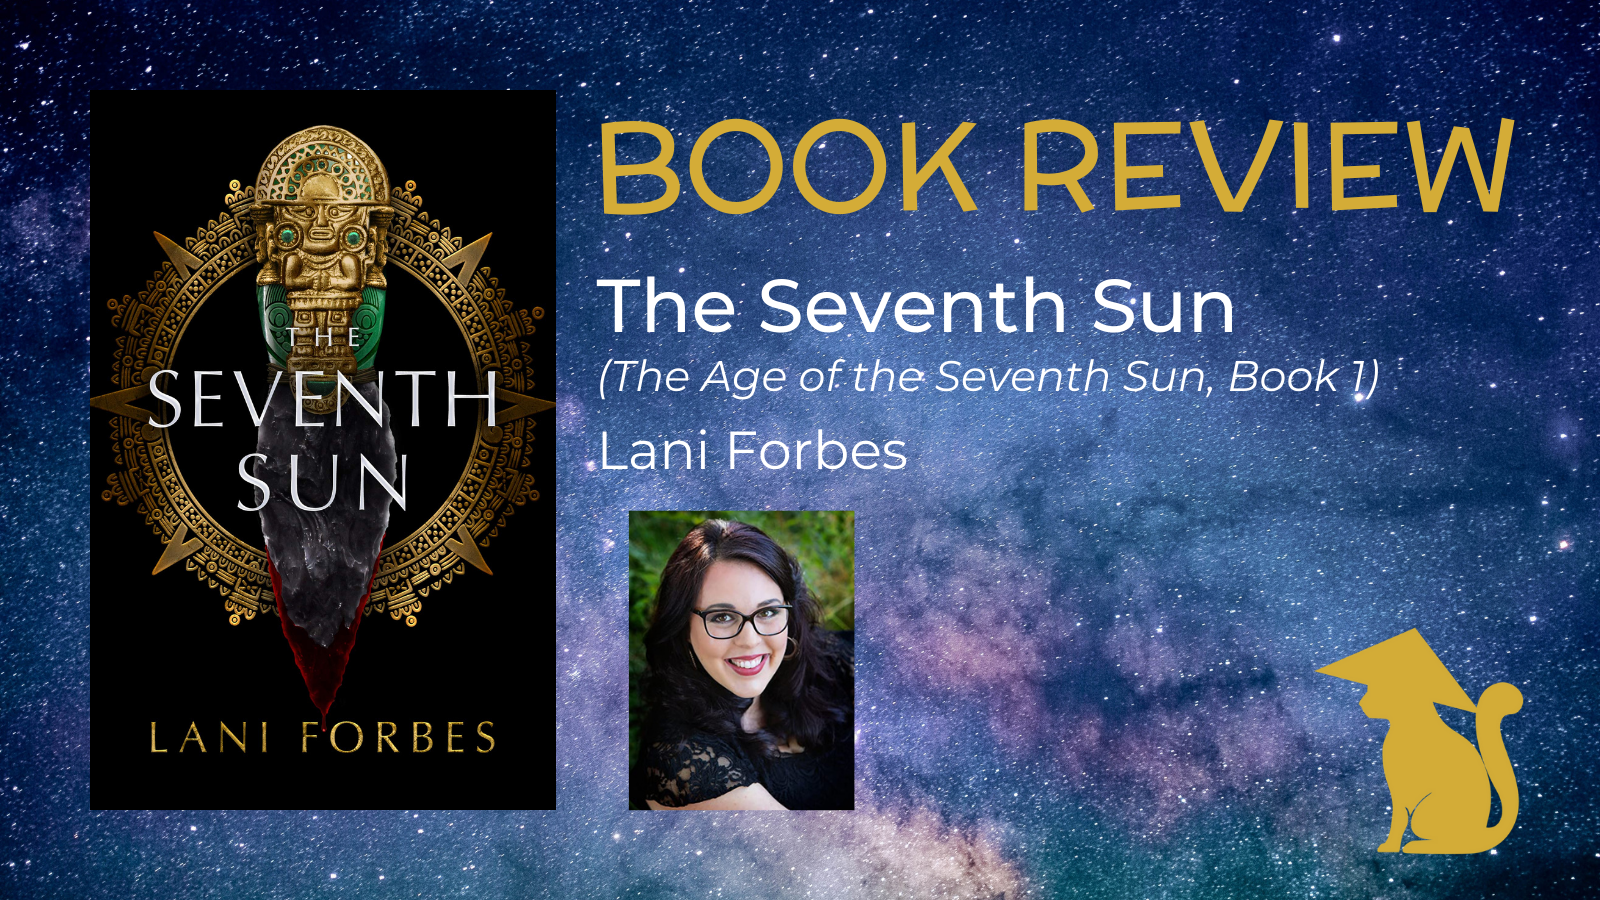 You are currently viewing The Seventh Sun by Lani Forbes